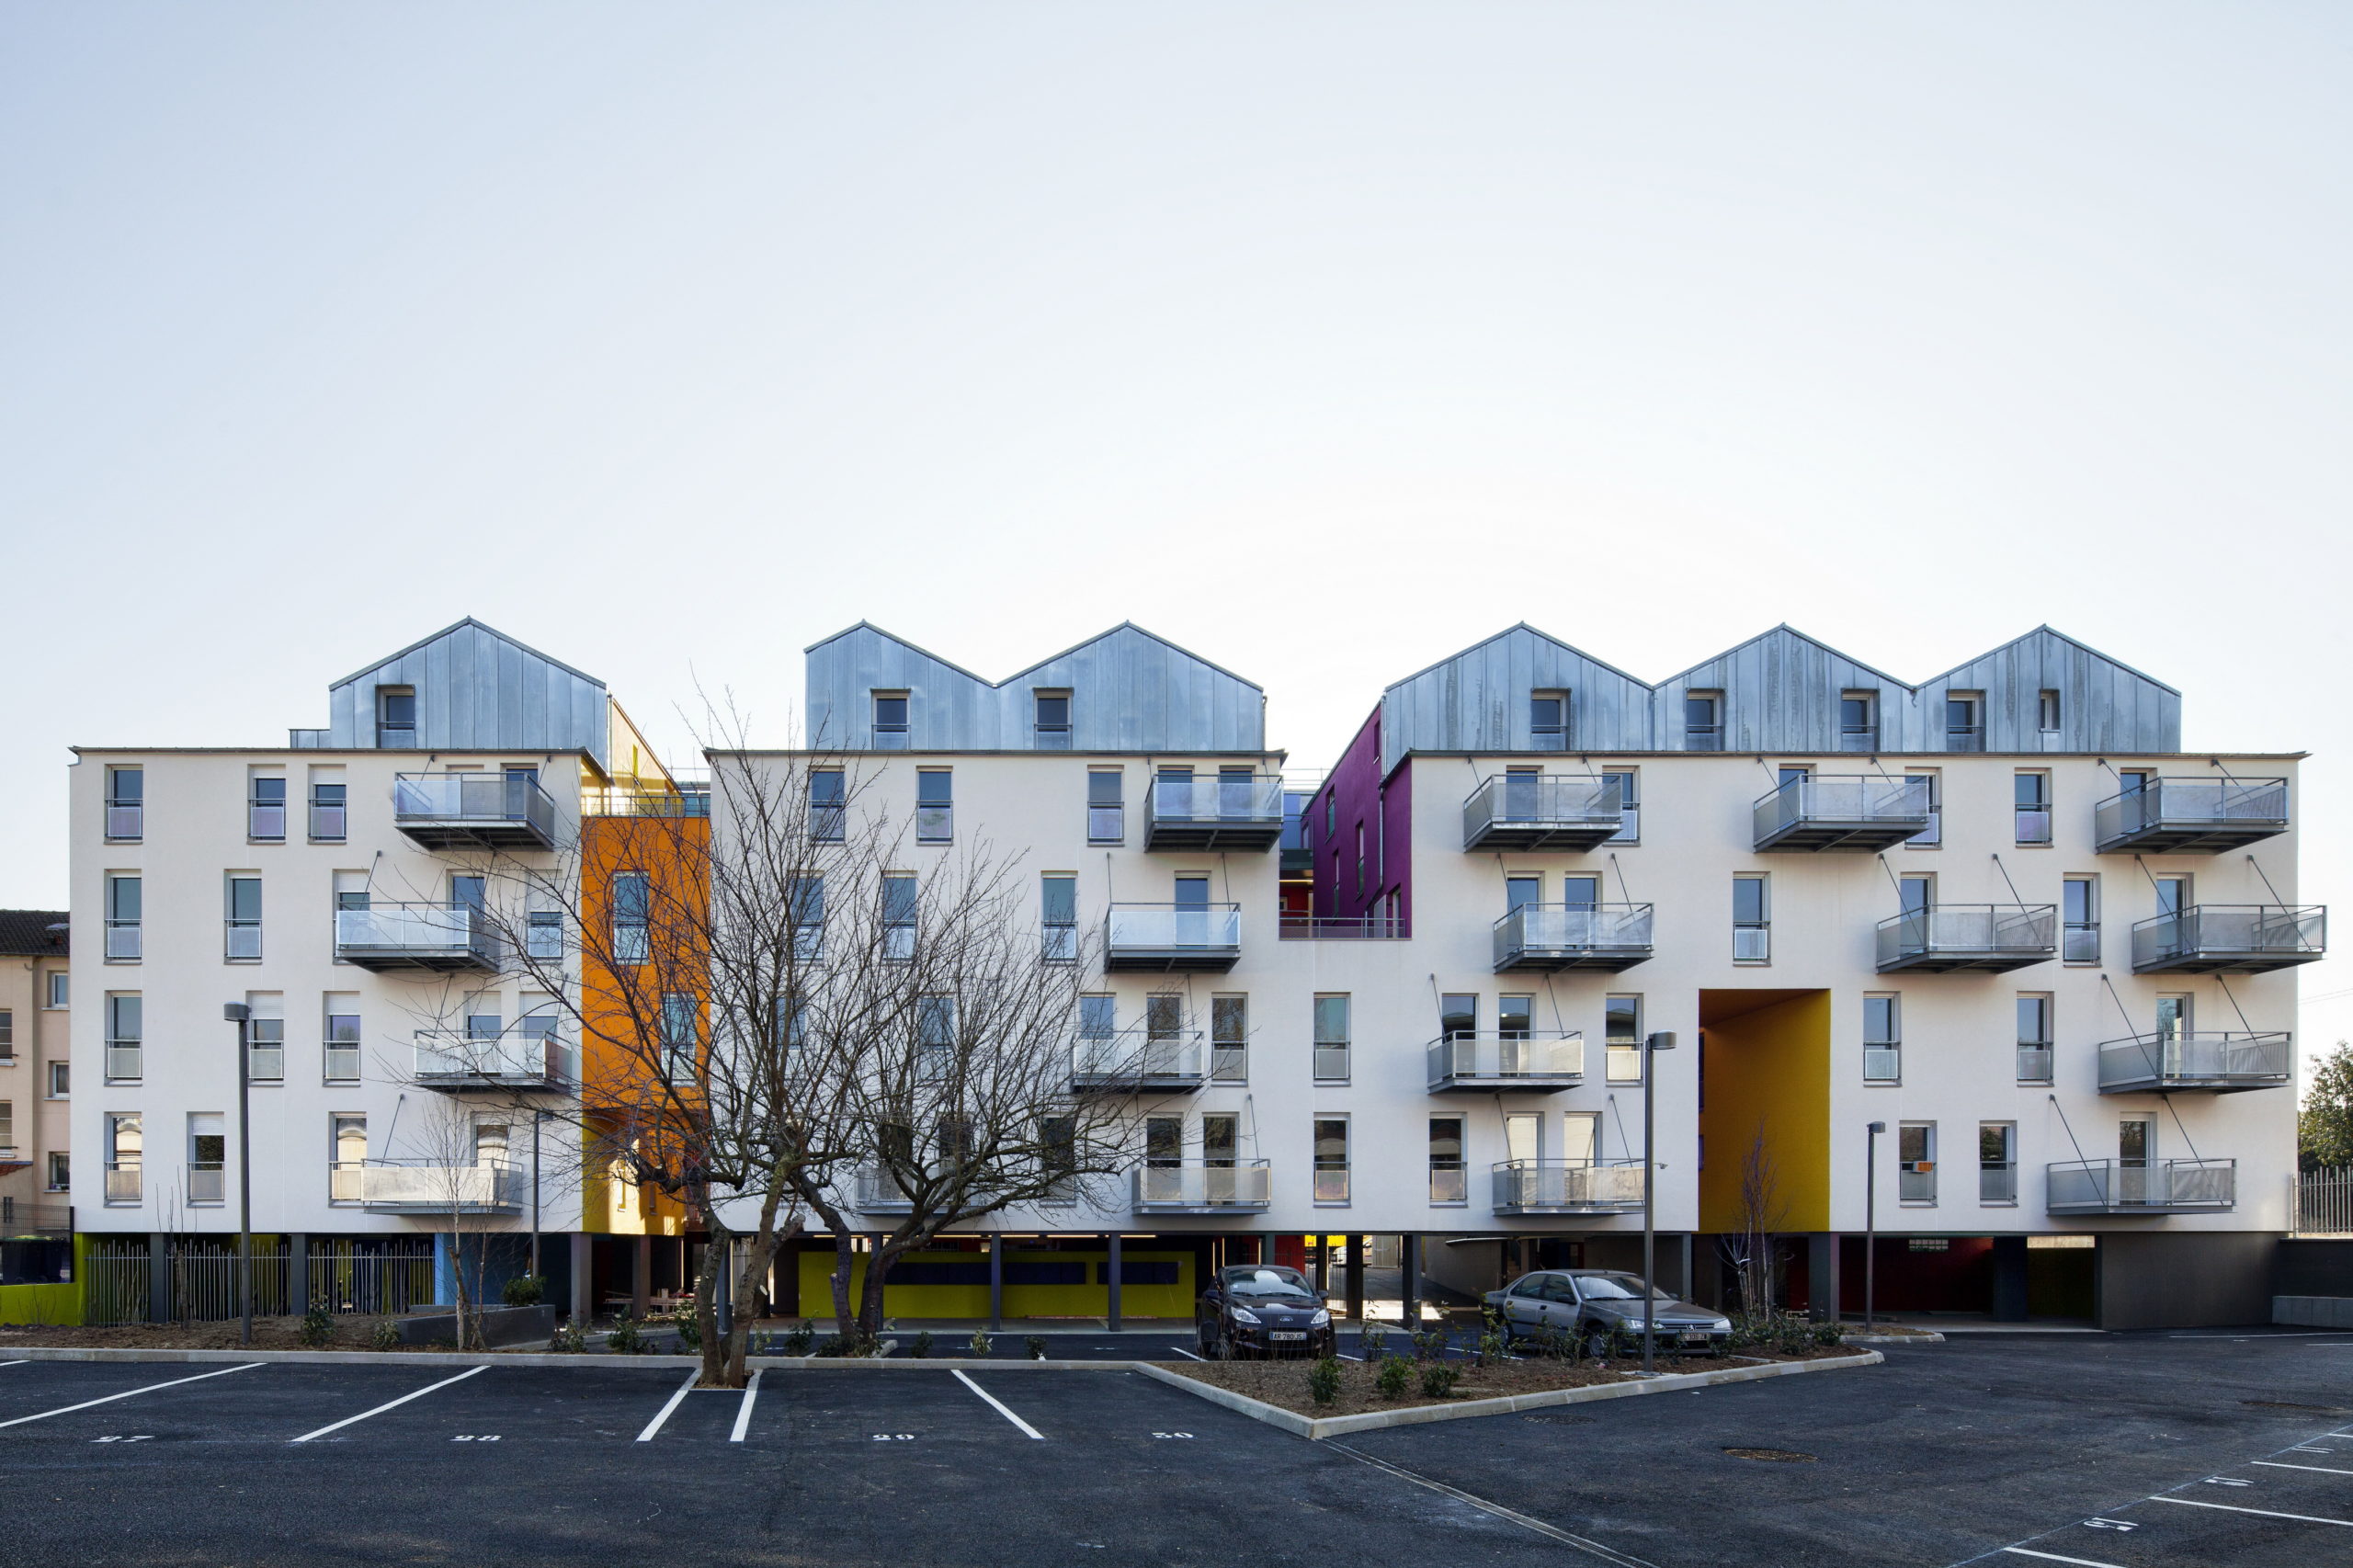 Social Housing in Athis-Mons (Immobilière 3F) by Atelier VongDC, Athis-Mons, France